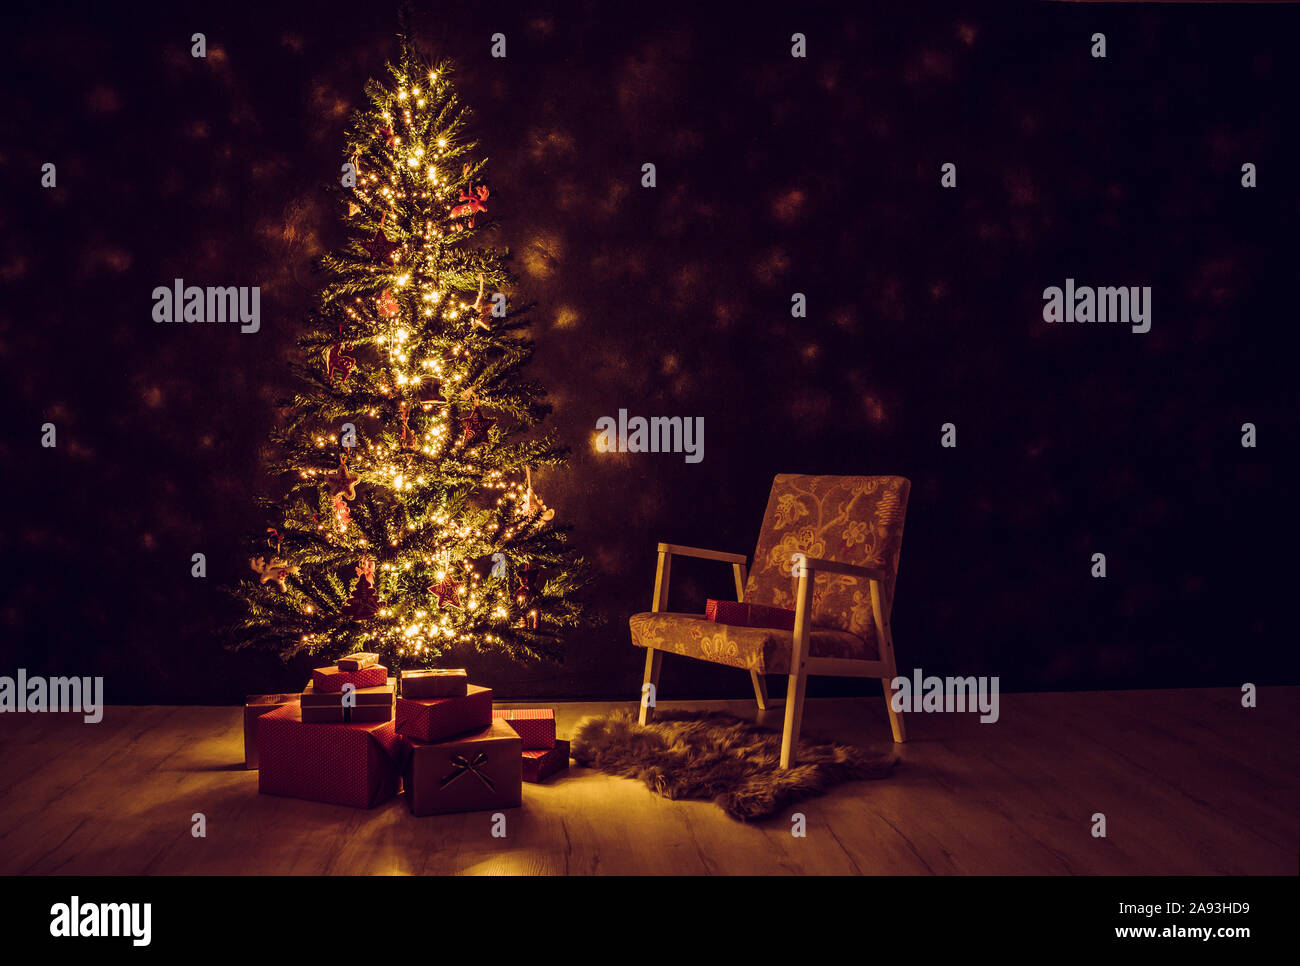 Decorated magical Christmas tree in front of black wall with Christmas red paper wrapped presents under the tree, retro chair next to it. Night. Stock Photo